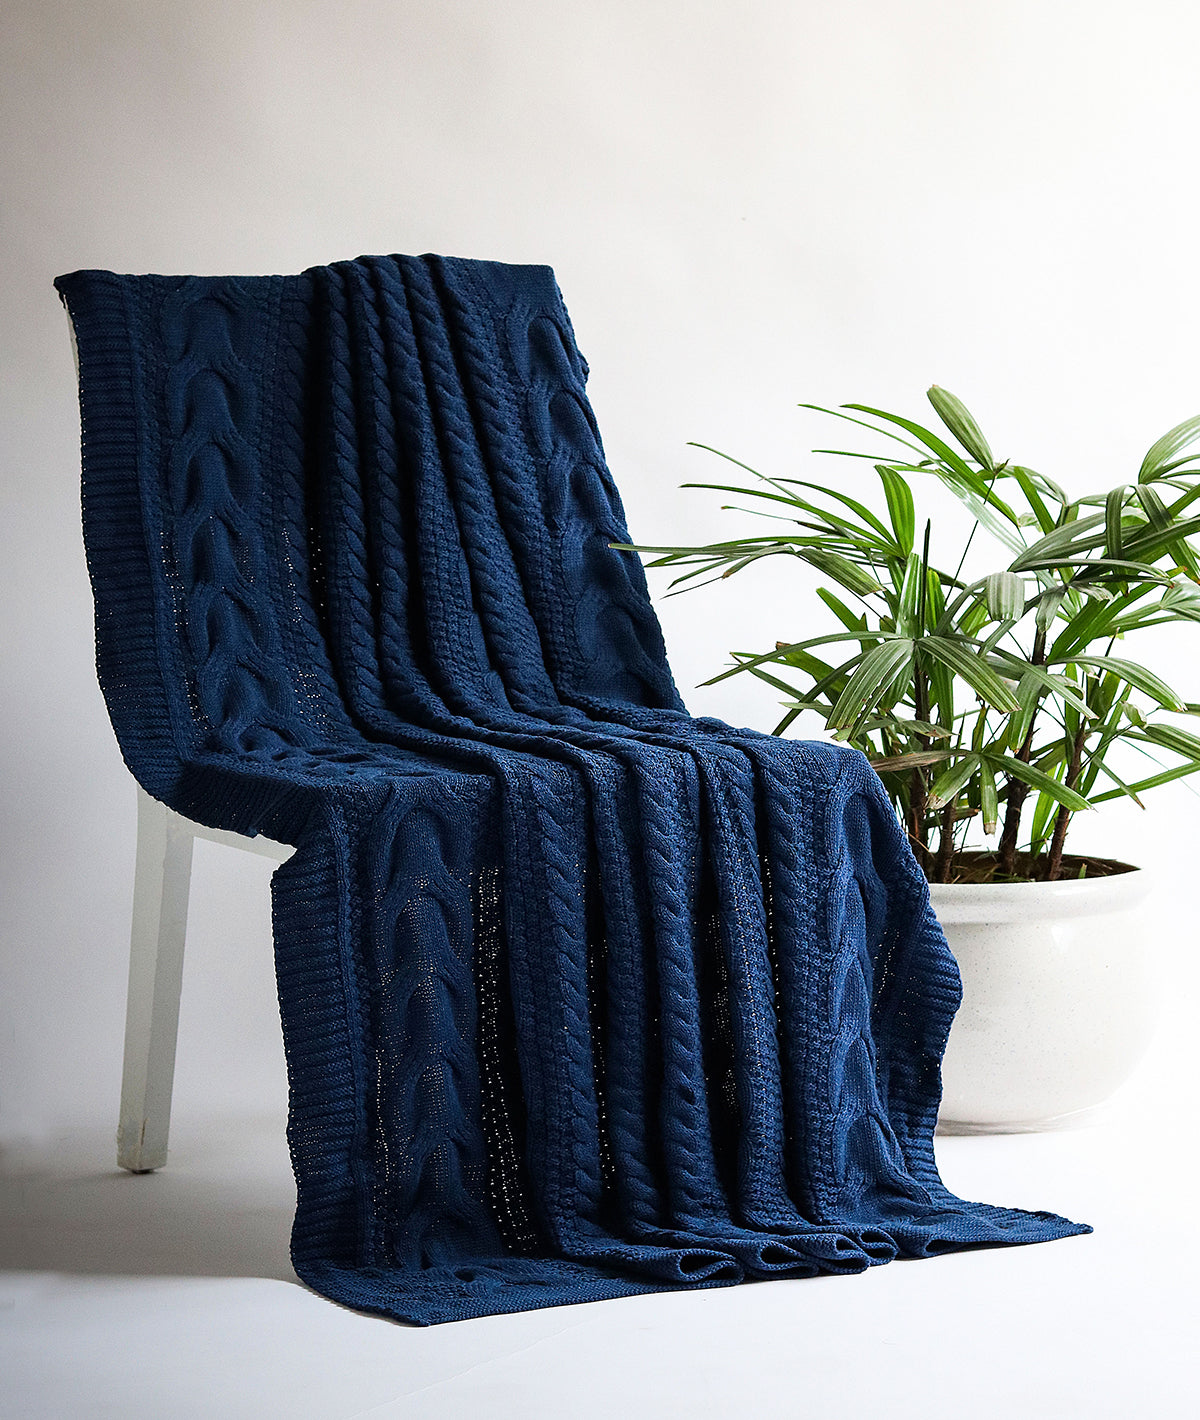 Classical Throw Navy Melange 100% Cotton Knitted All Season AC Throw Blanket